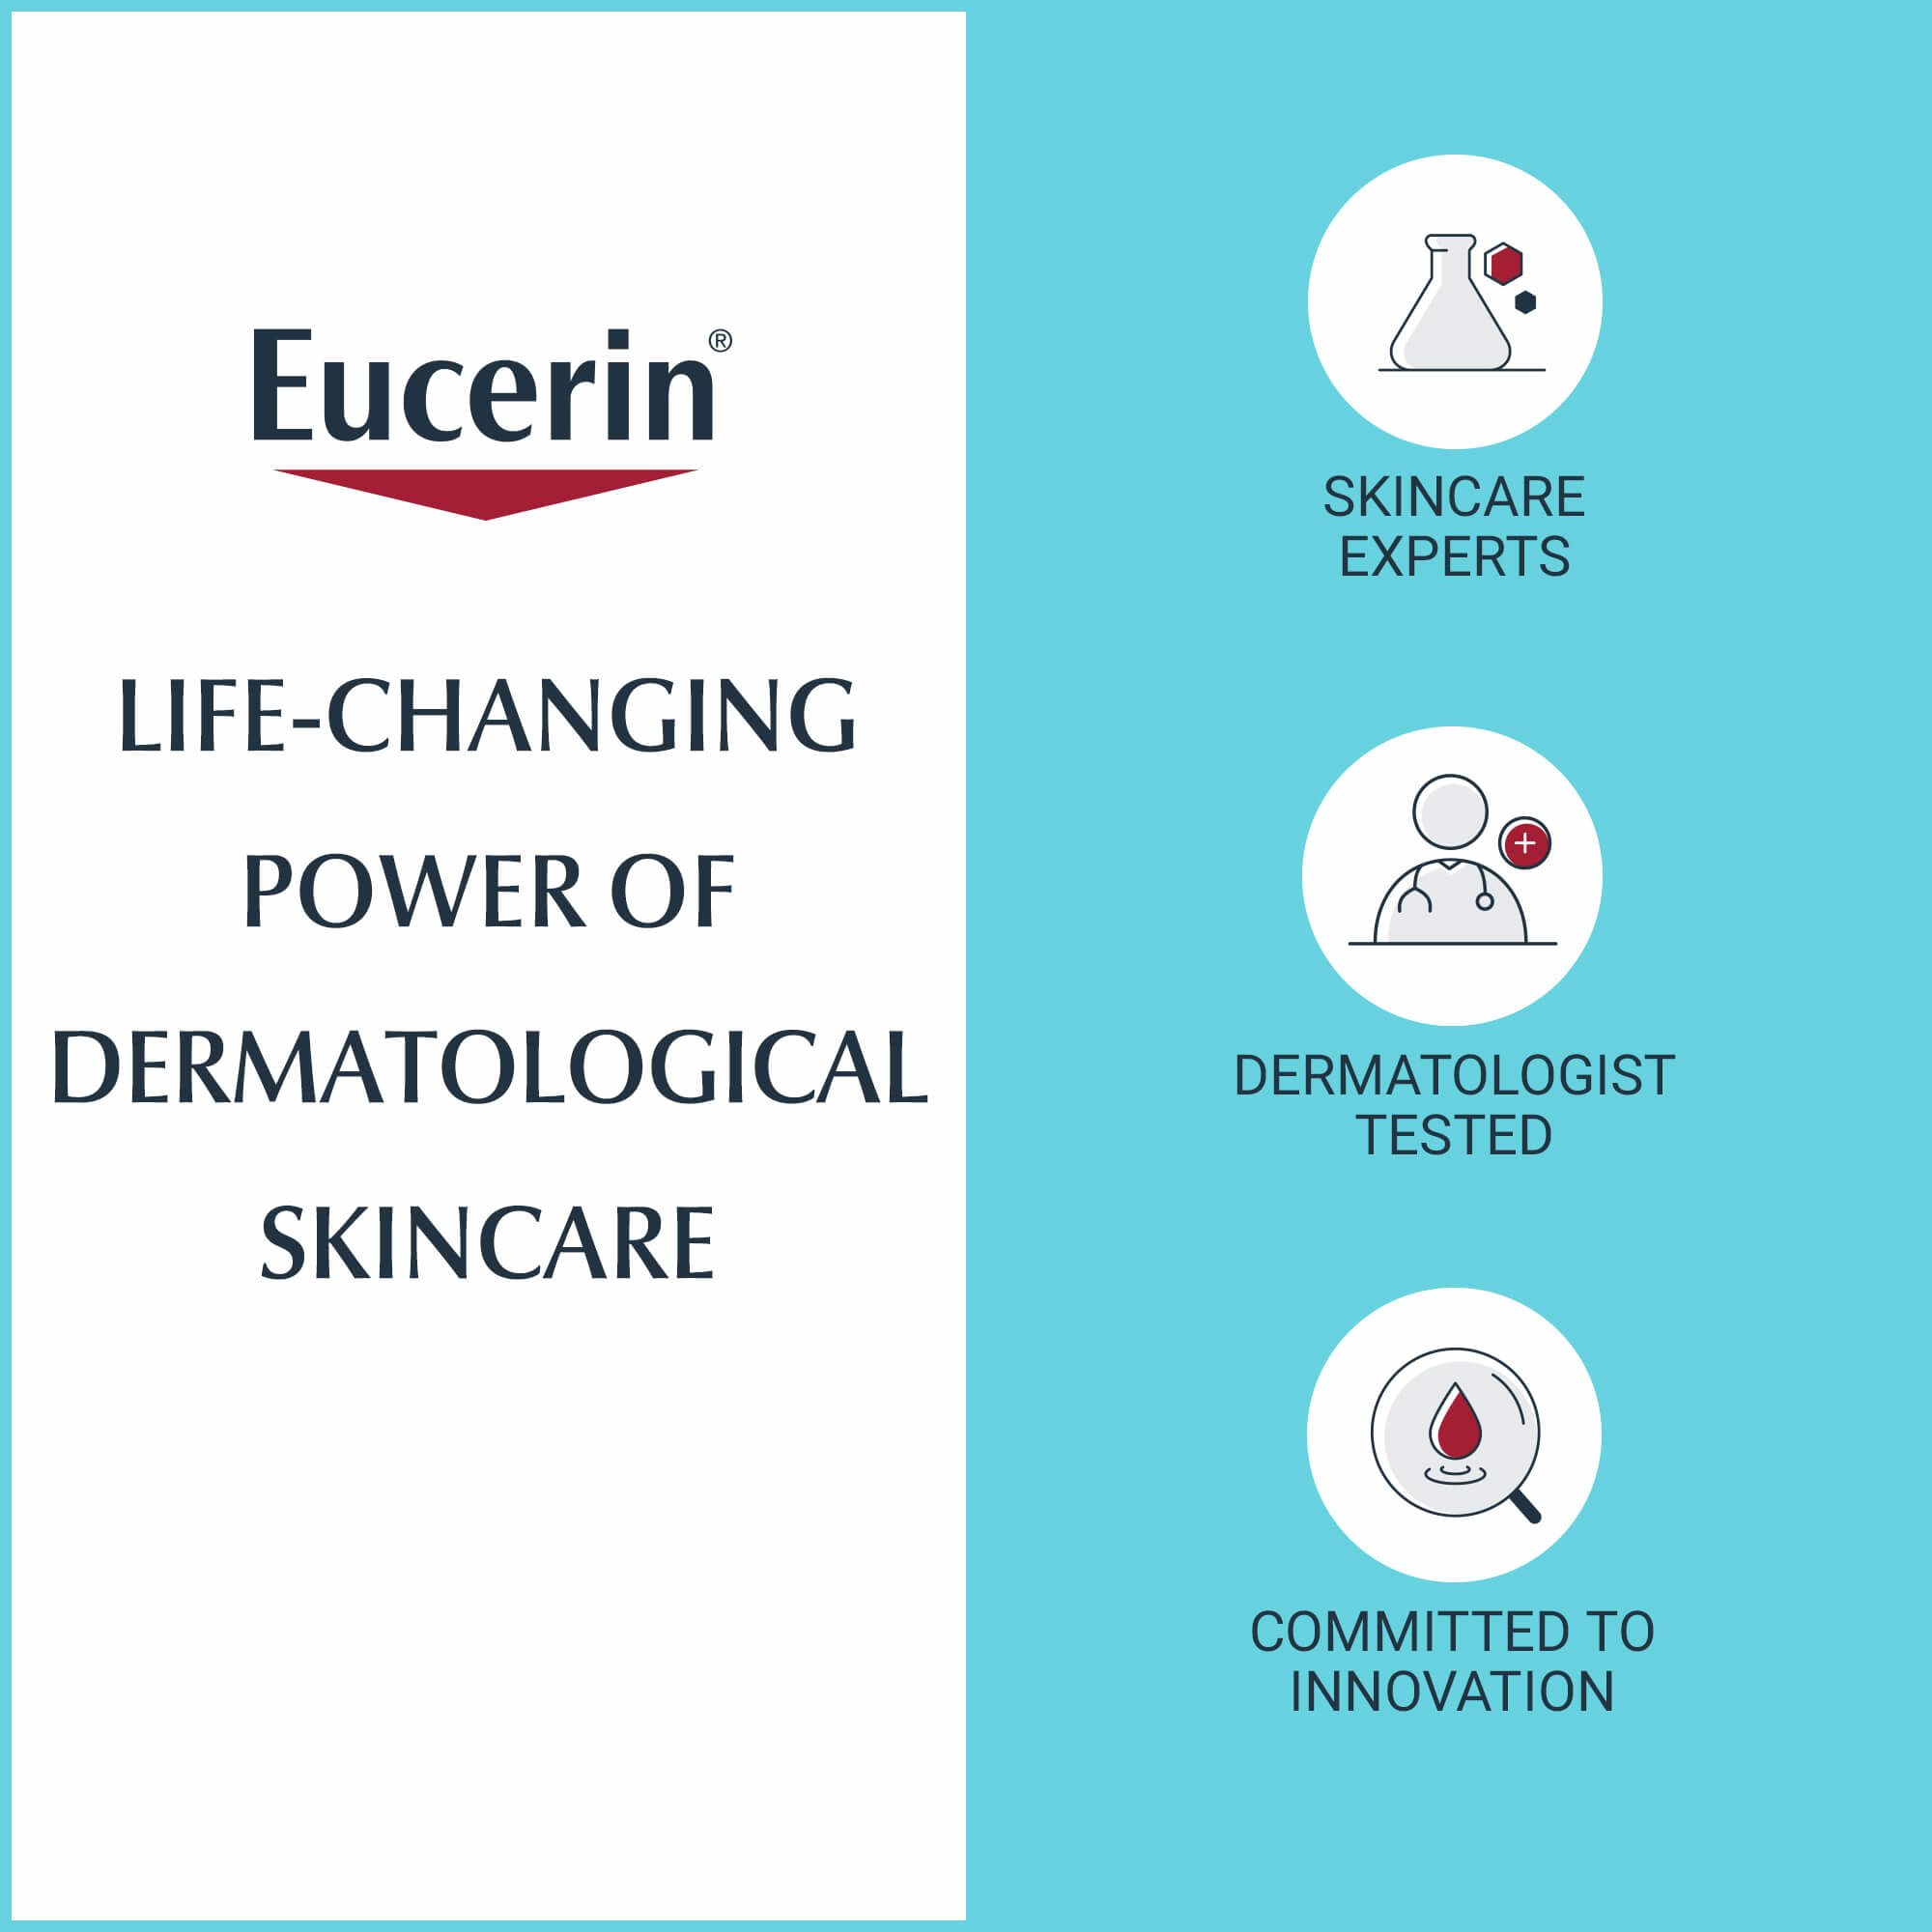 An image describing the benefits of using Eucerin skincare.